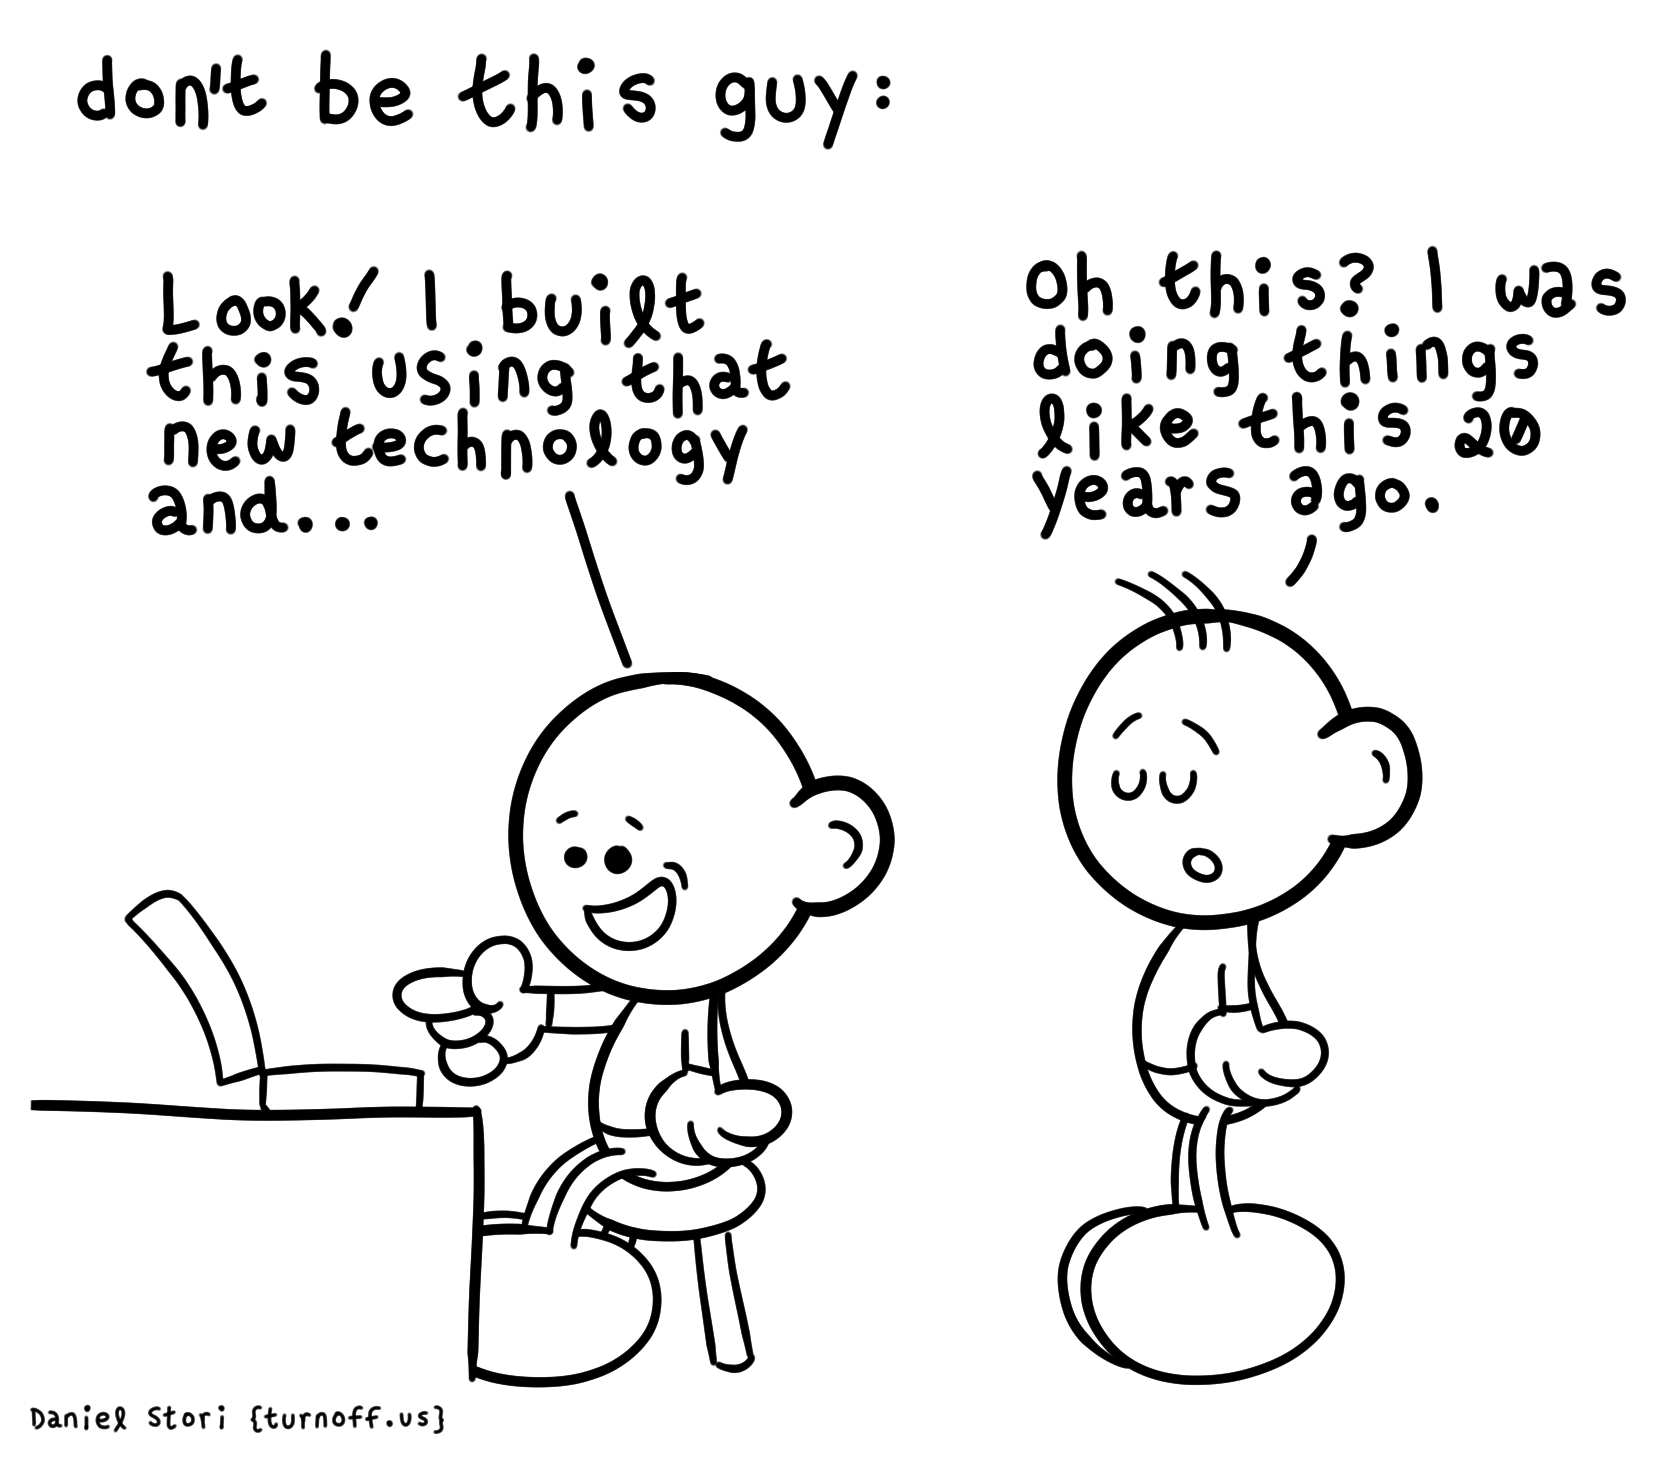 Don't be this guy comic